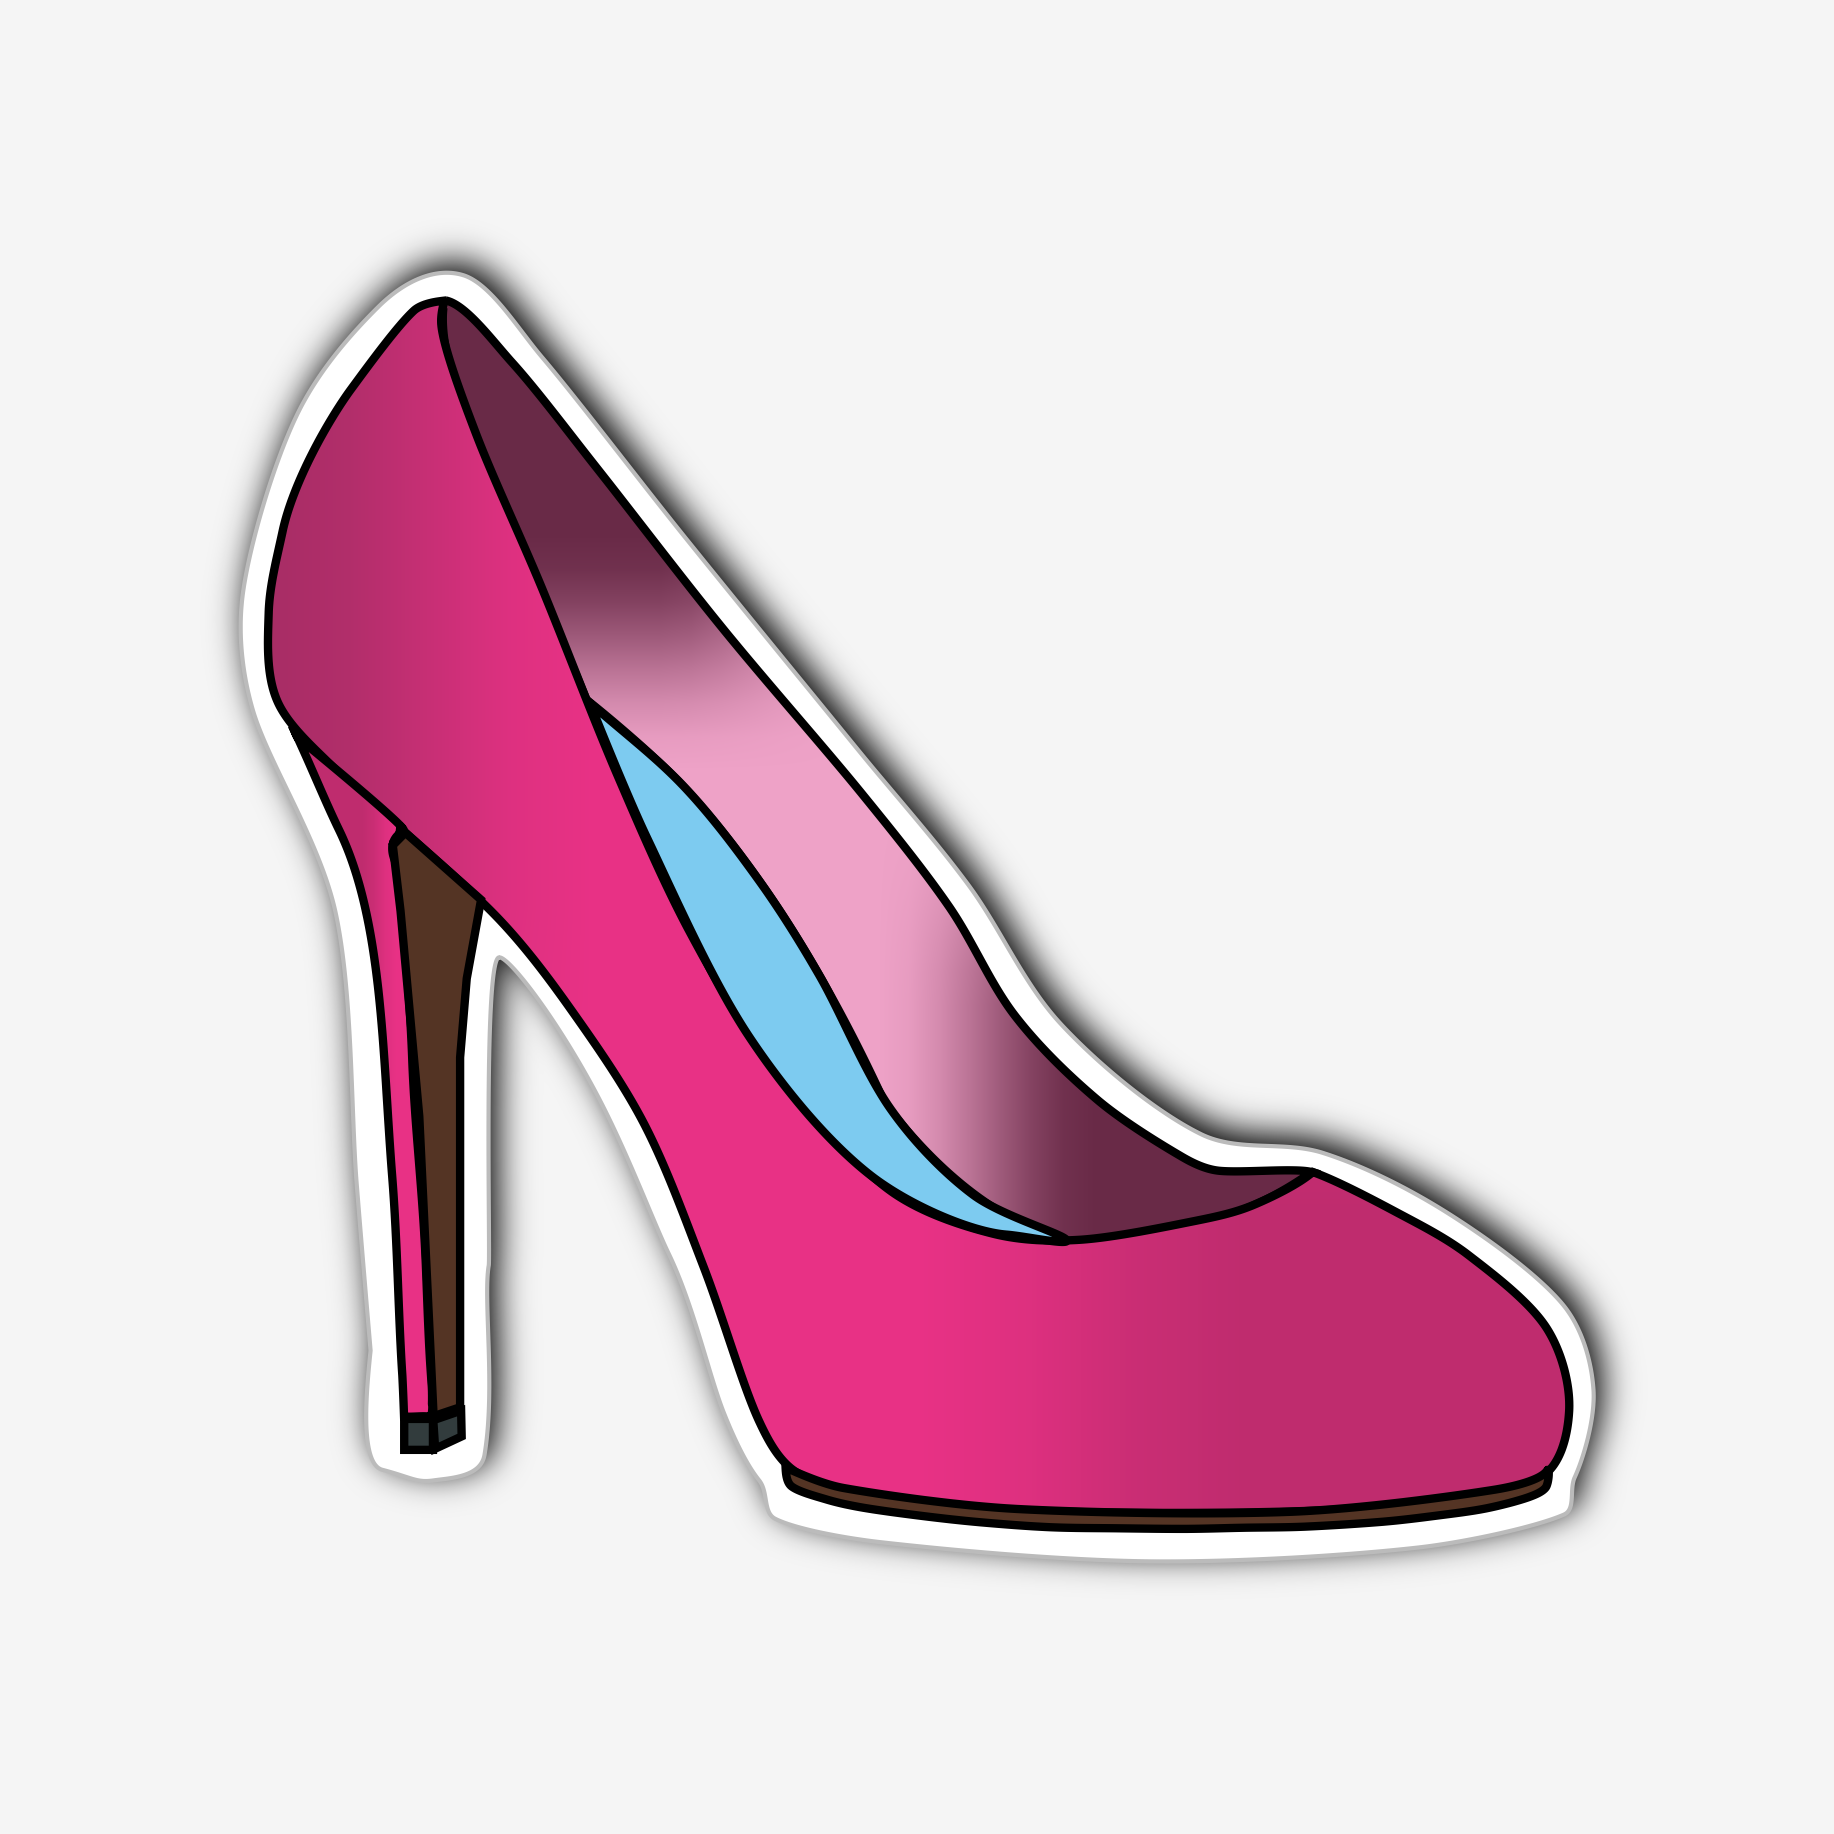 Vinyl Wall Decal Shoes High Heels Stilettoes Shopping Fashion Stickers  (g4904)